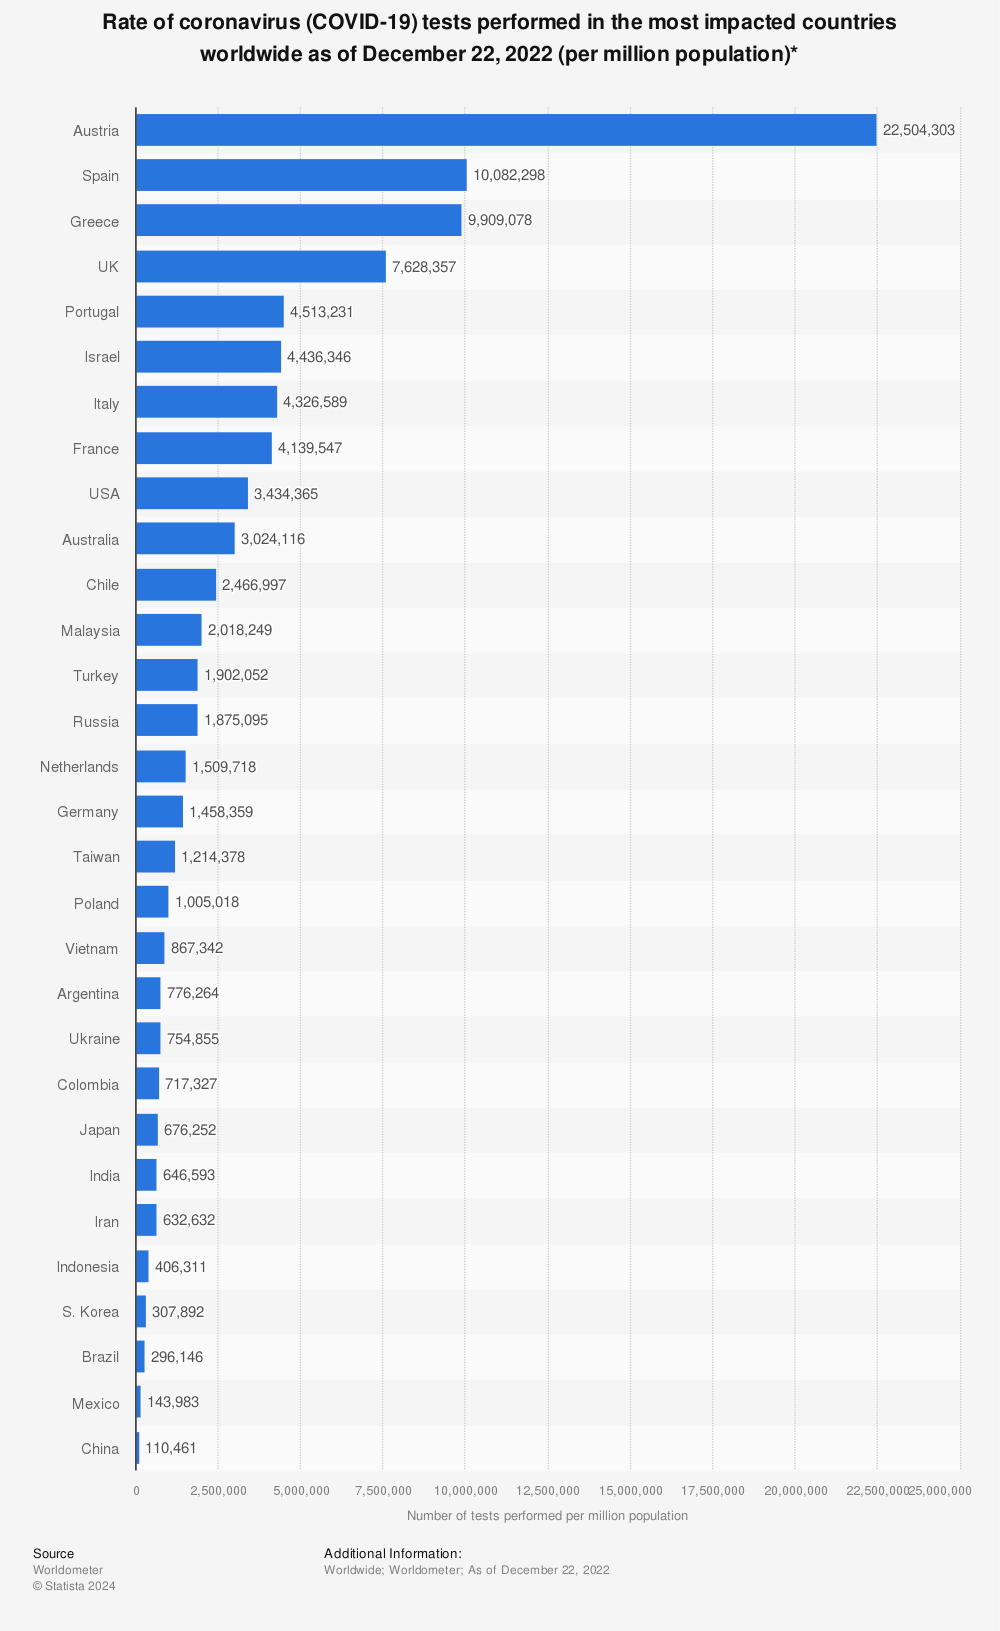 Statistic: Rate of coronavirus (COVID-19) tests performed in the most impacted countries worldwide as of December 22, 2022 (per million population)* | Statista